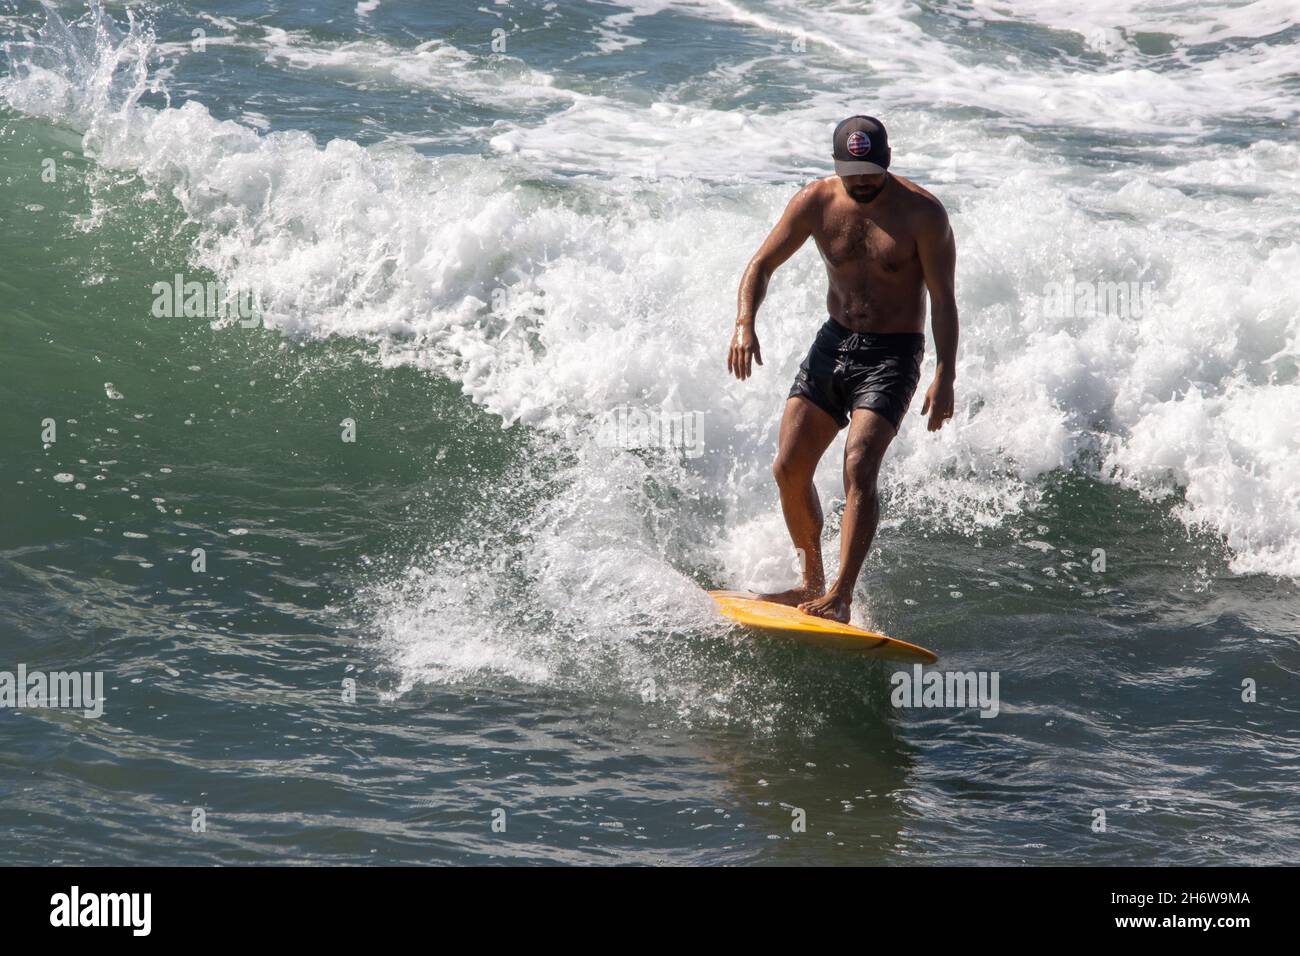 Free Images : man, ocean, surfer, surf, surfboard, extreme sport, water  sport, wind wave, boardsport, surfing equipment and supplies, surface water  sports, individual sports, bodyboarding, wakesurfing 4913x3456 - - 125818 -  Free stock photos - PxHere